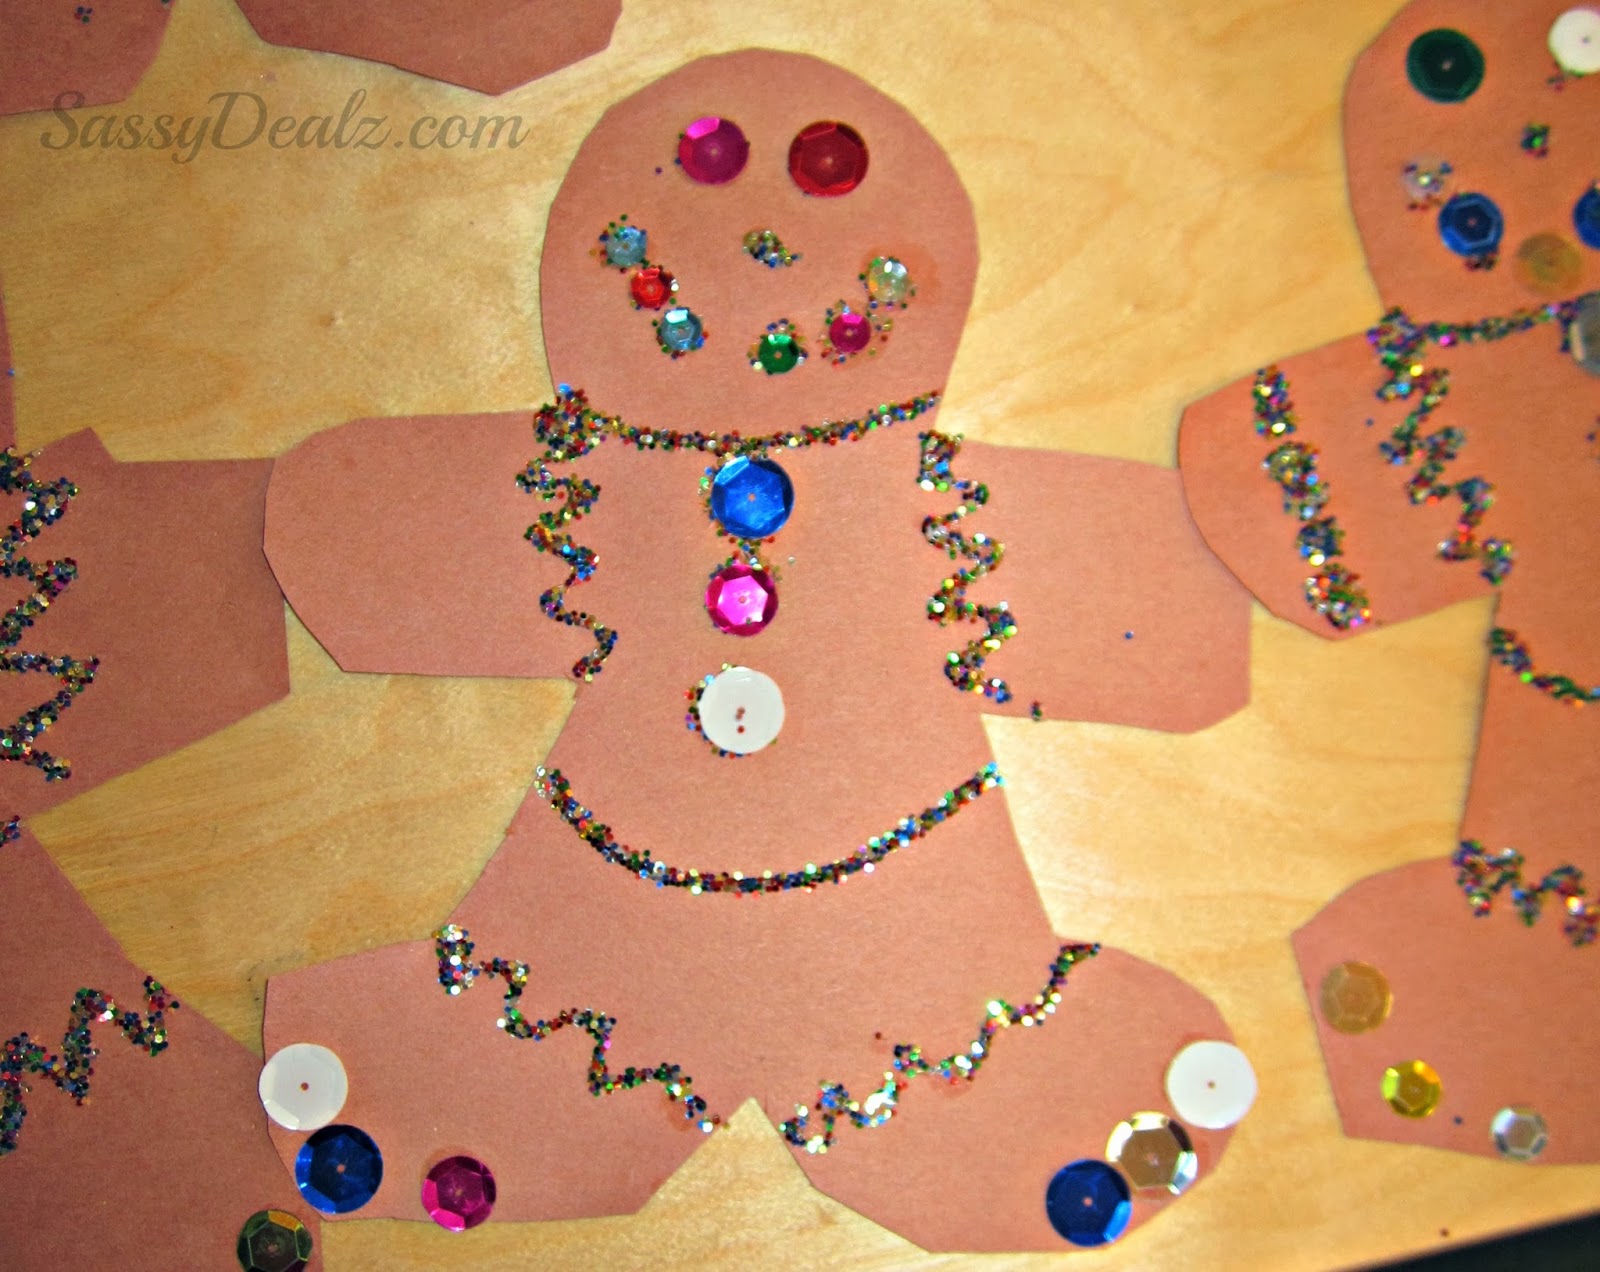 Gingerbread Man Christmas Craft Idea For Kids - Crafty Morning